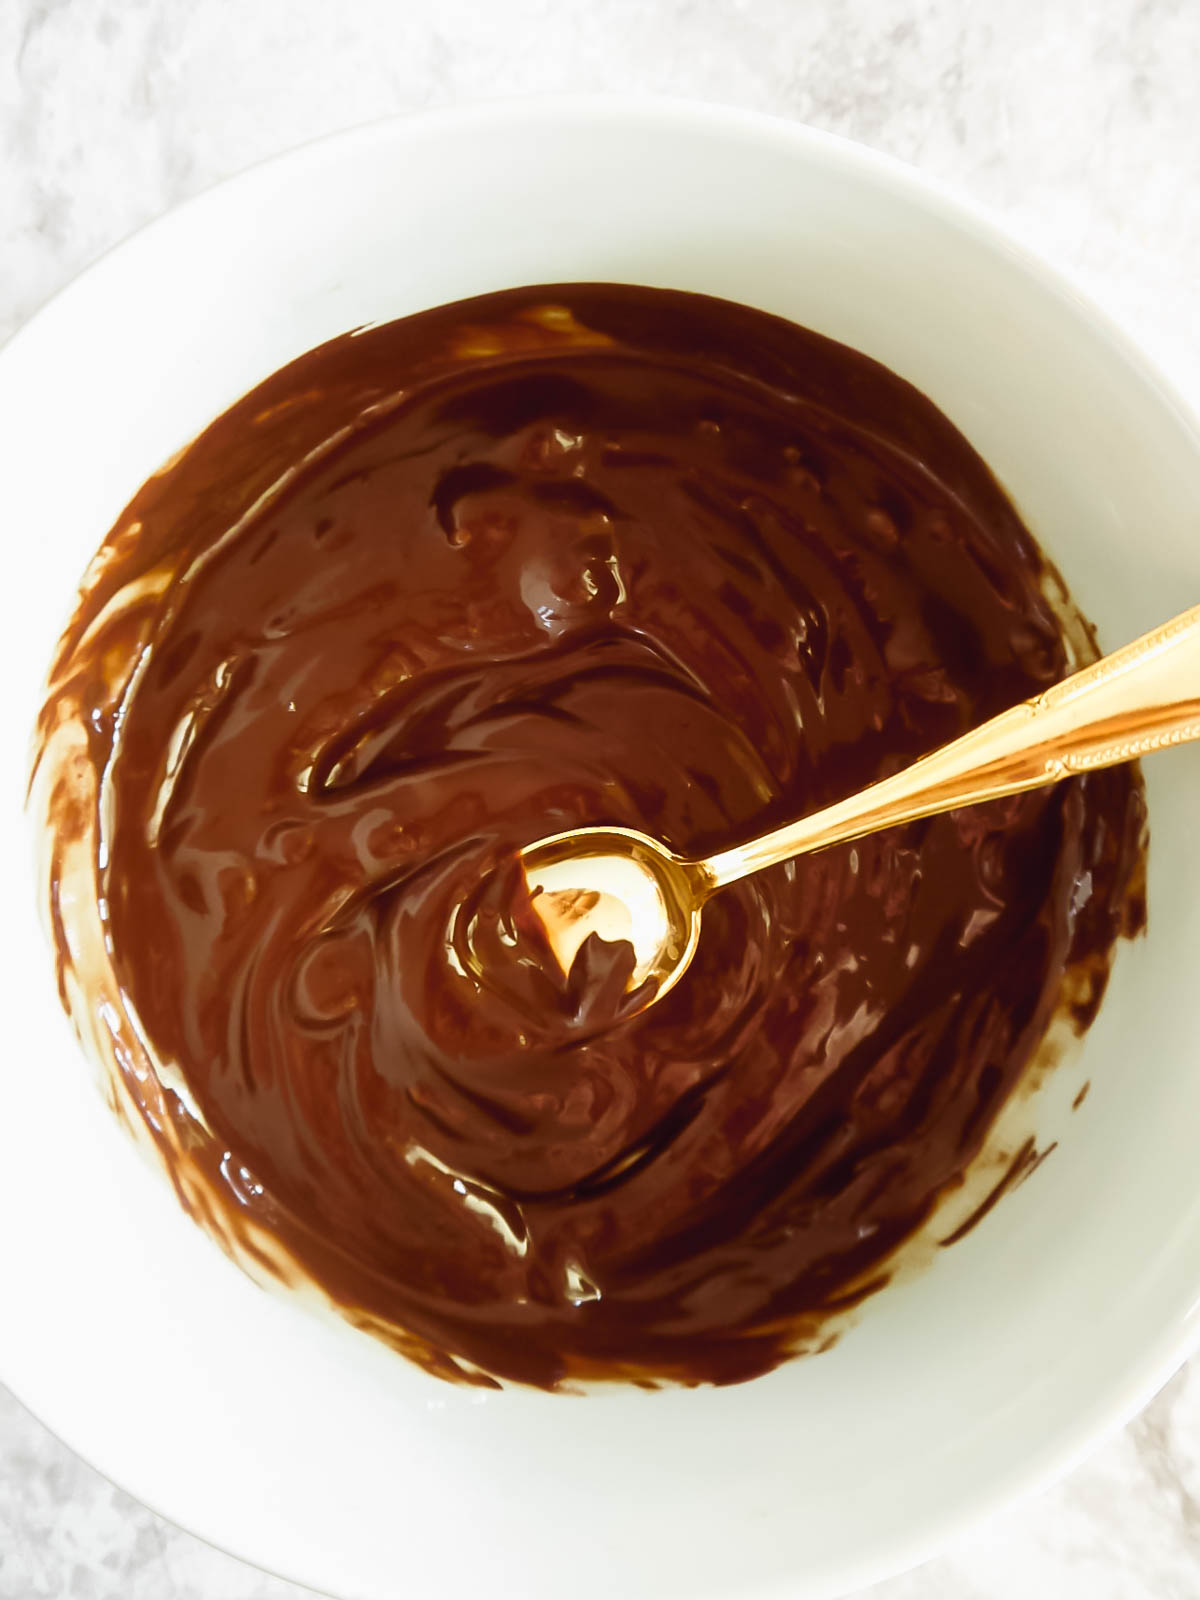 melted dairy-free chocolate